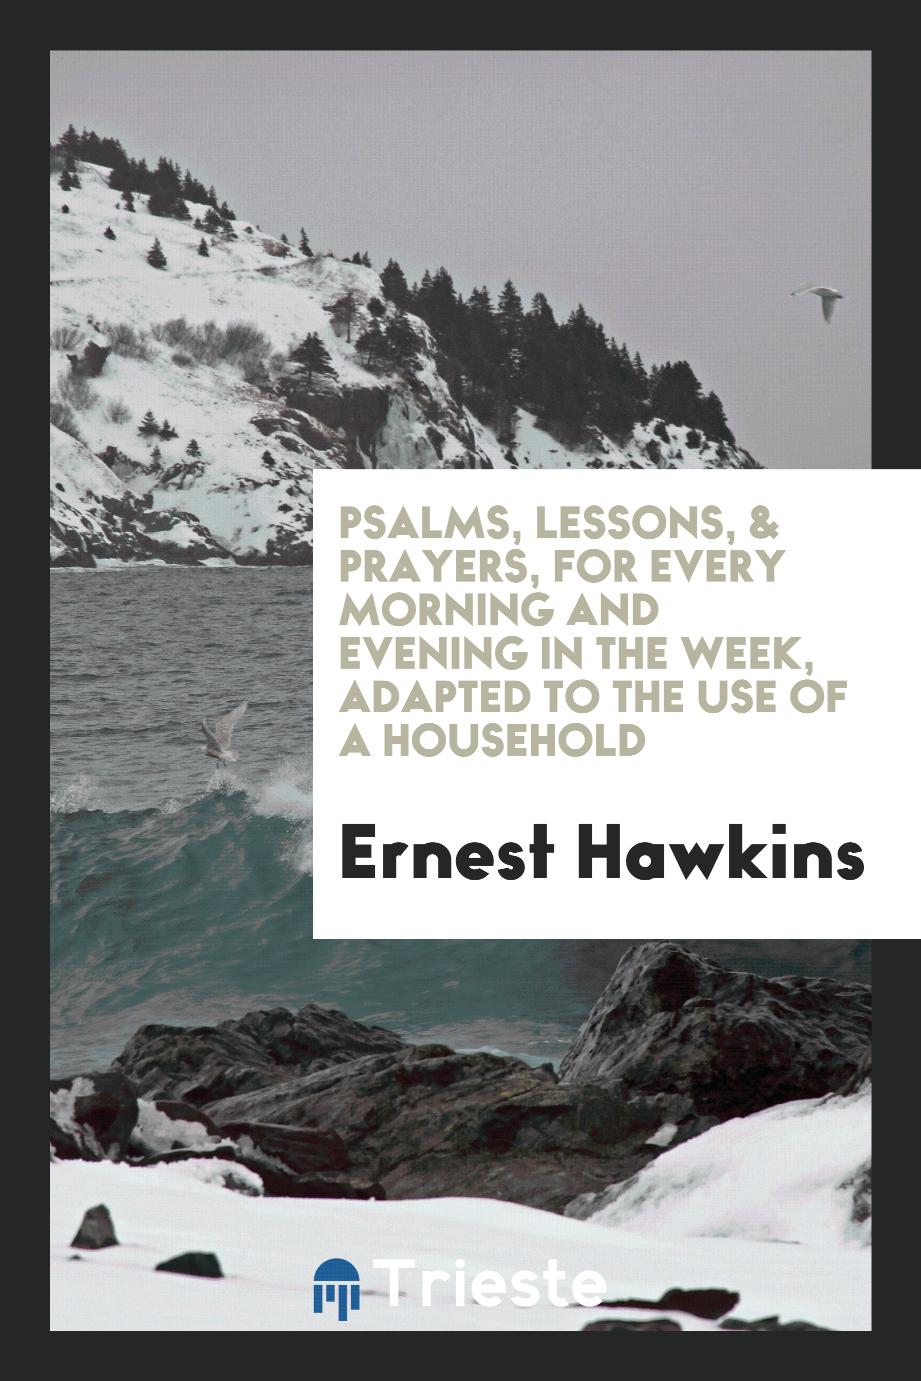 Psalms, lessons, & prayers, for every morning and evening in the week, adapted to the use of a household